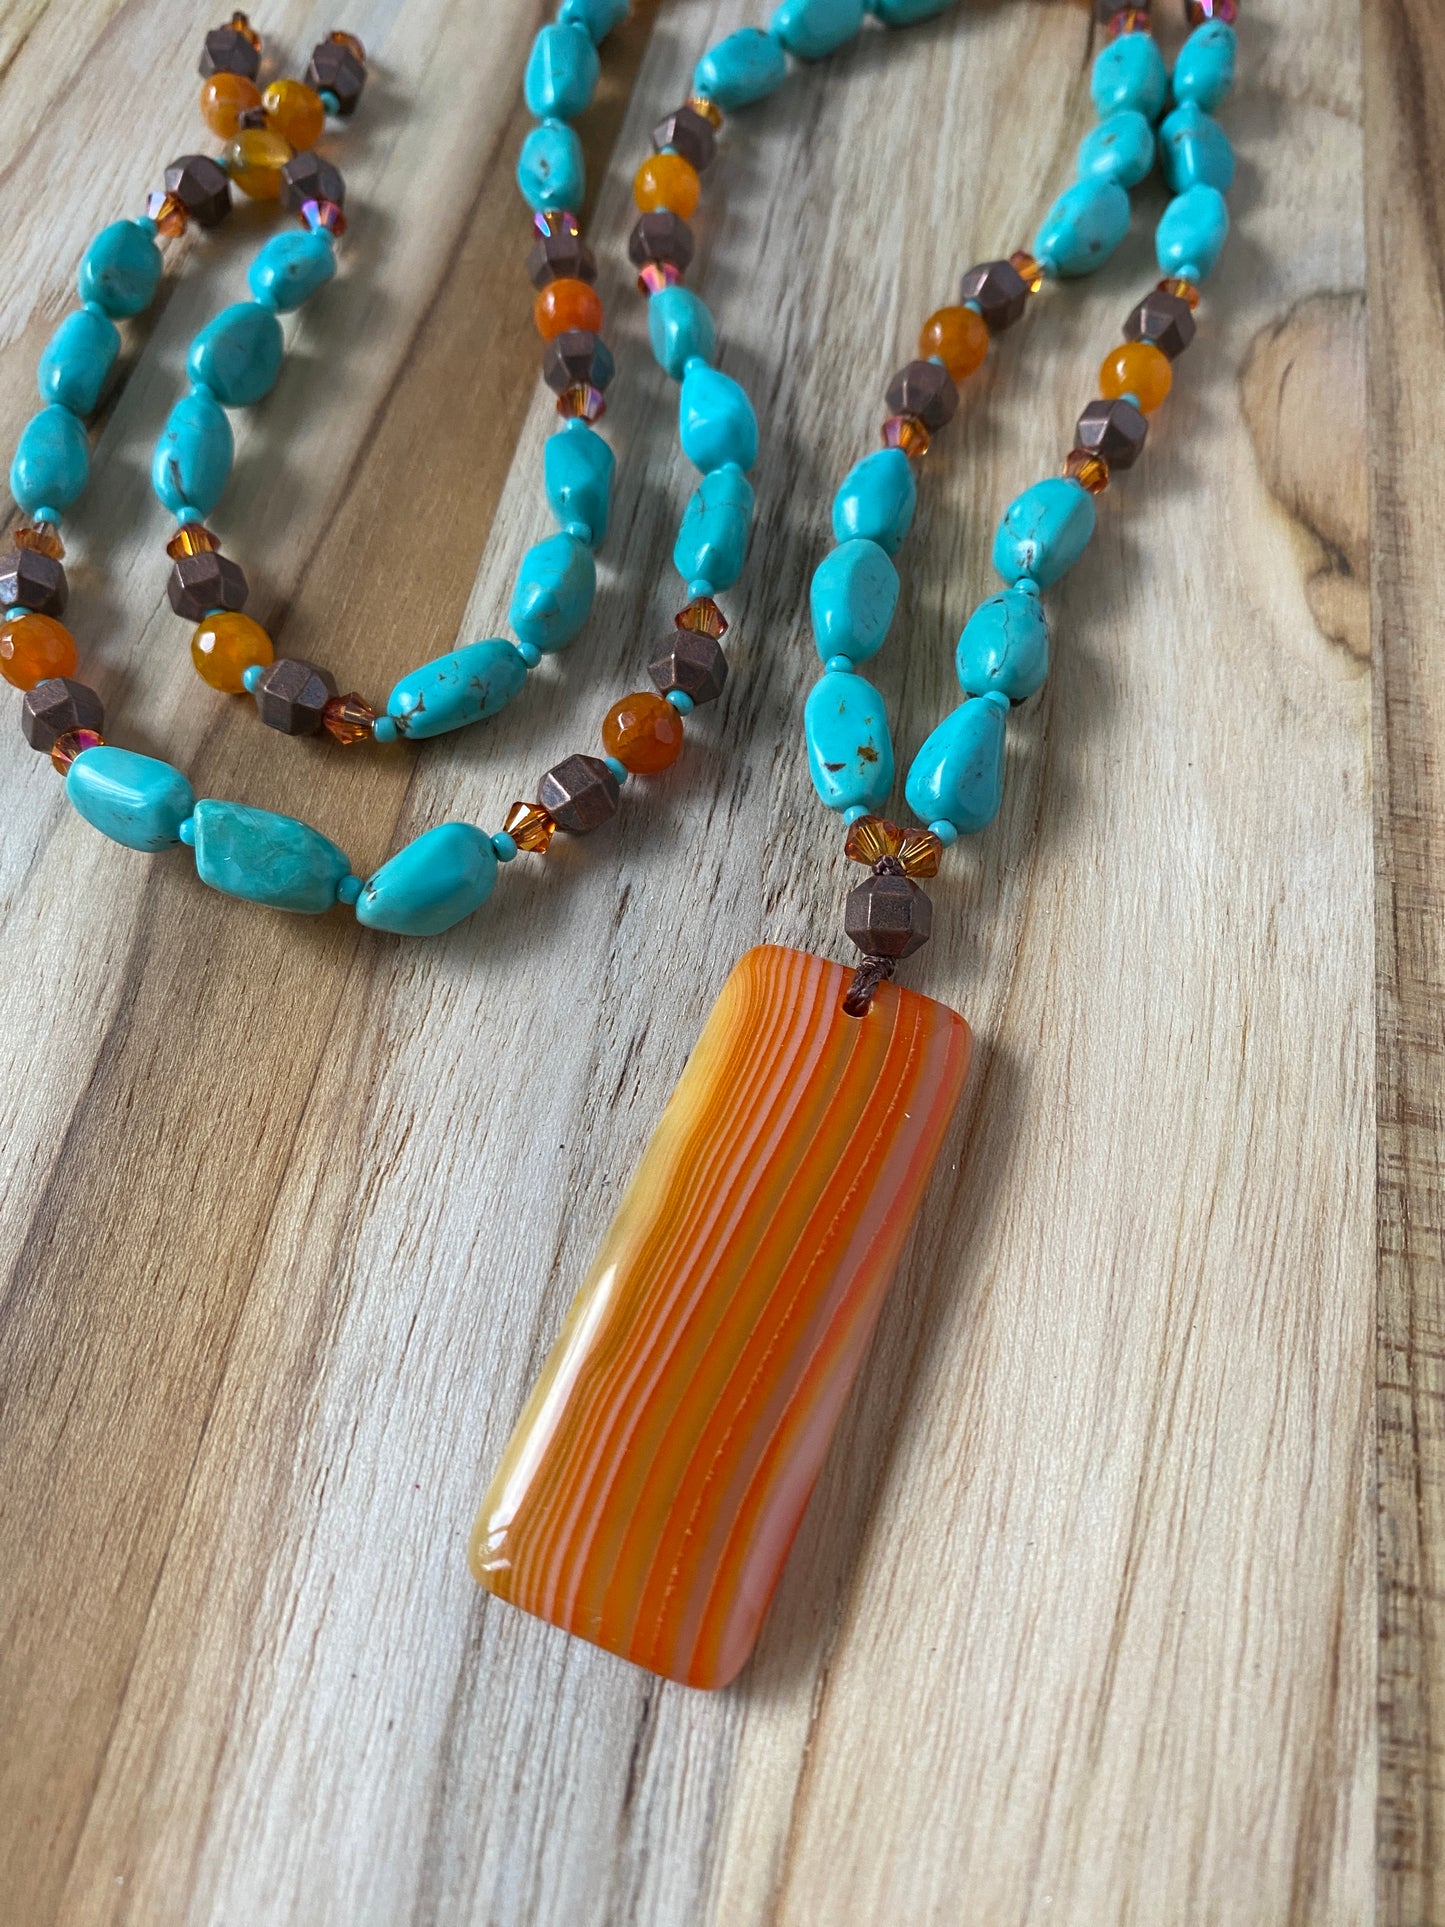 30" Long Orange Agate Pendant Beaded Necklace with Natural Turquoise, Agate & Crystal Beads